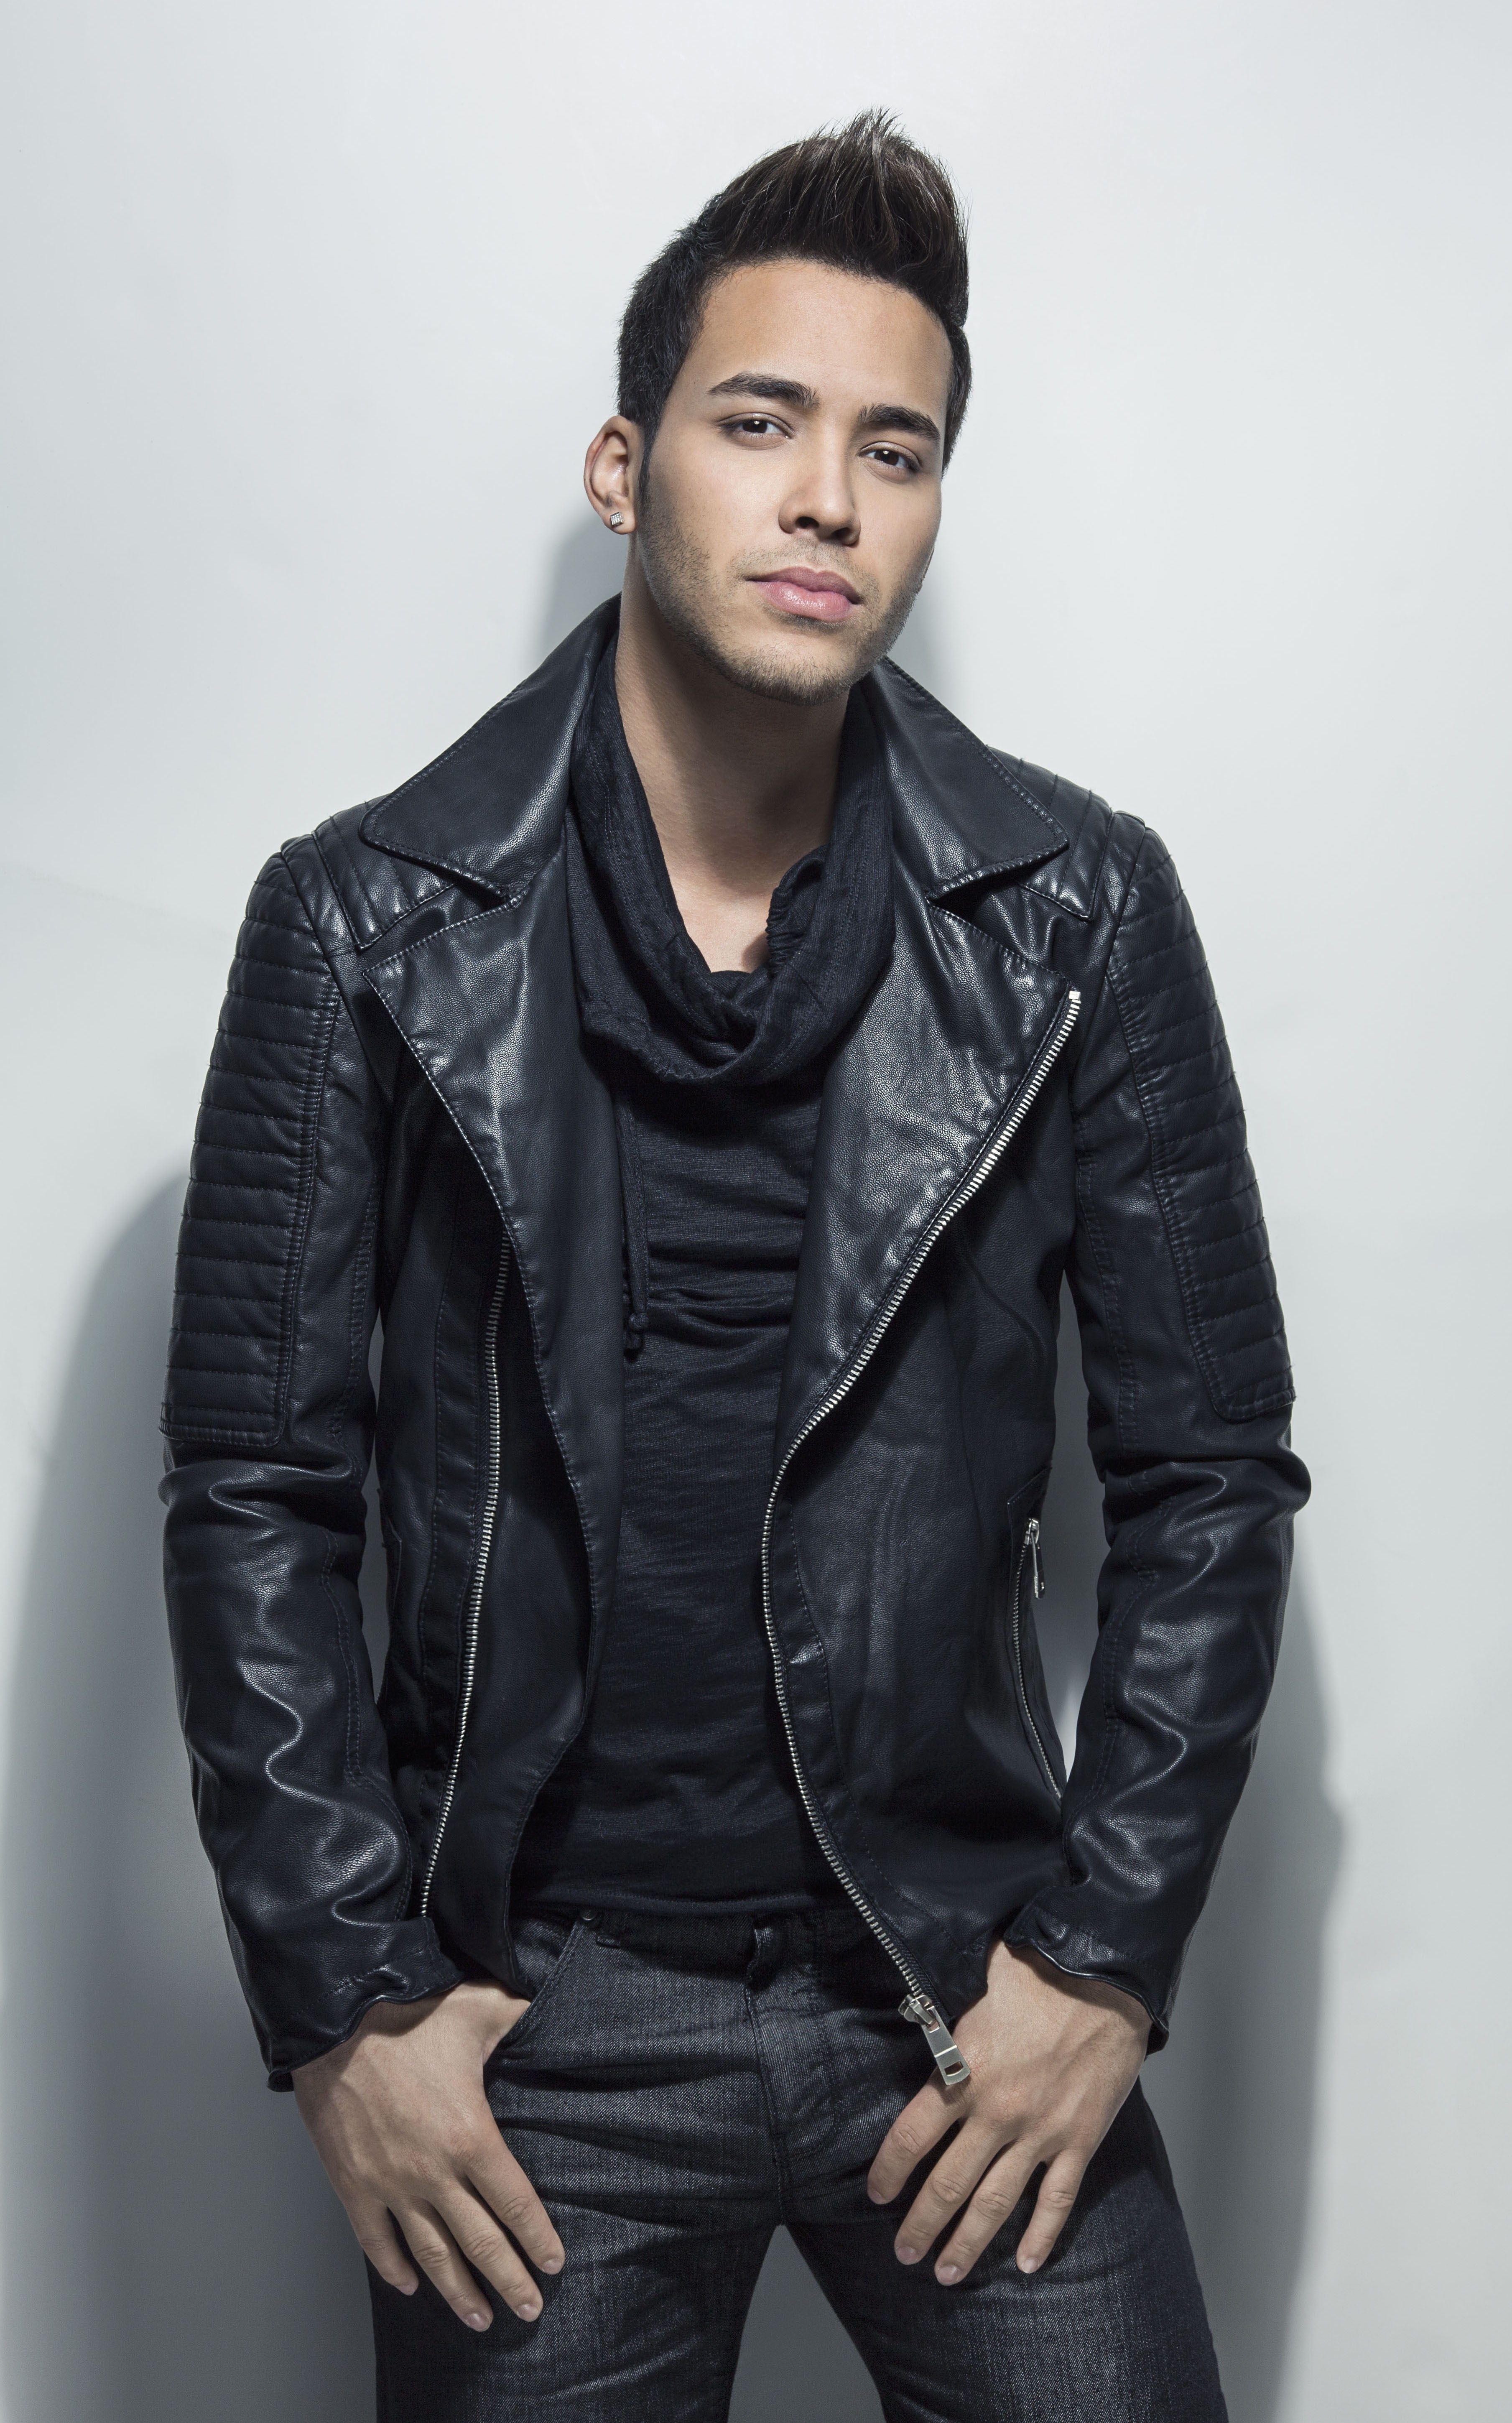 Prince Royce. Known people people news and biographies